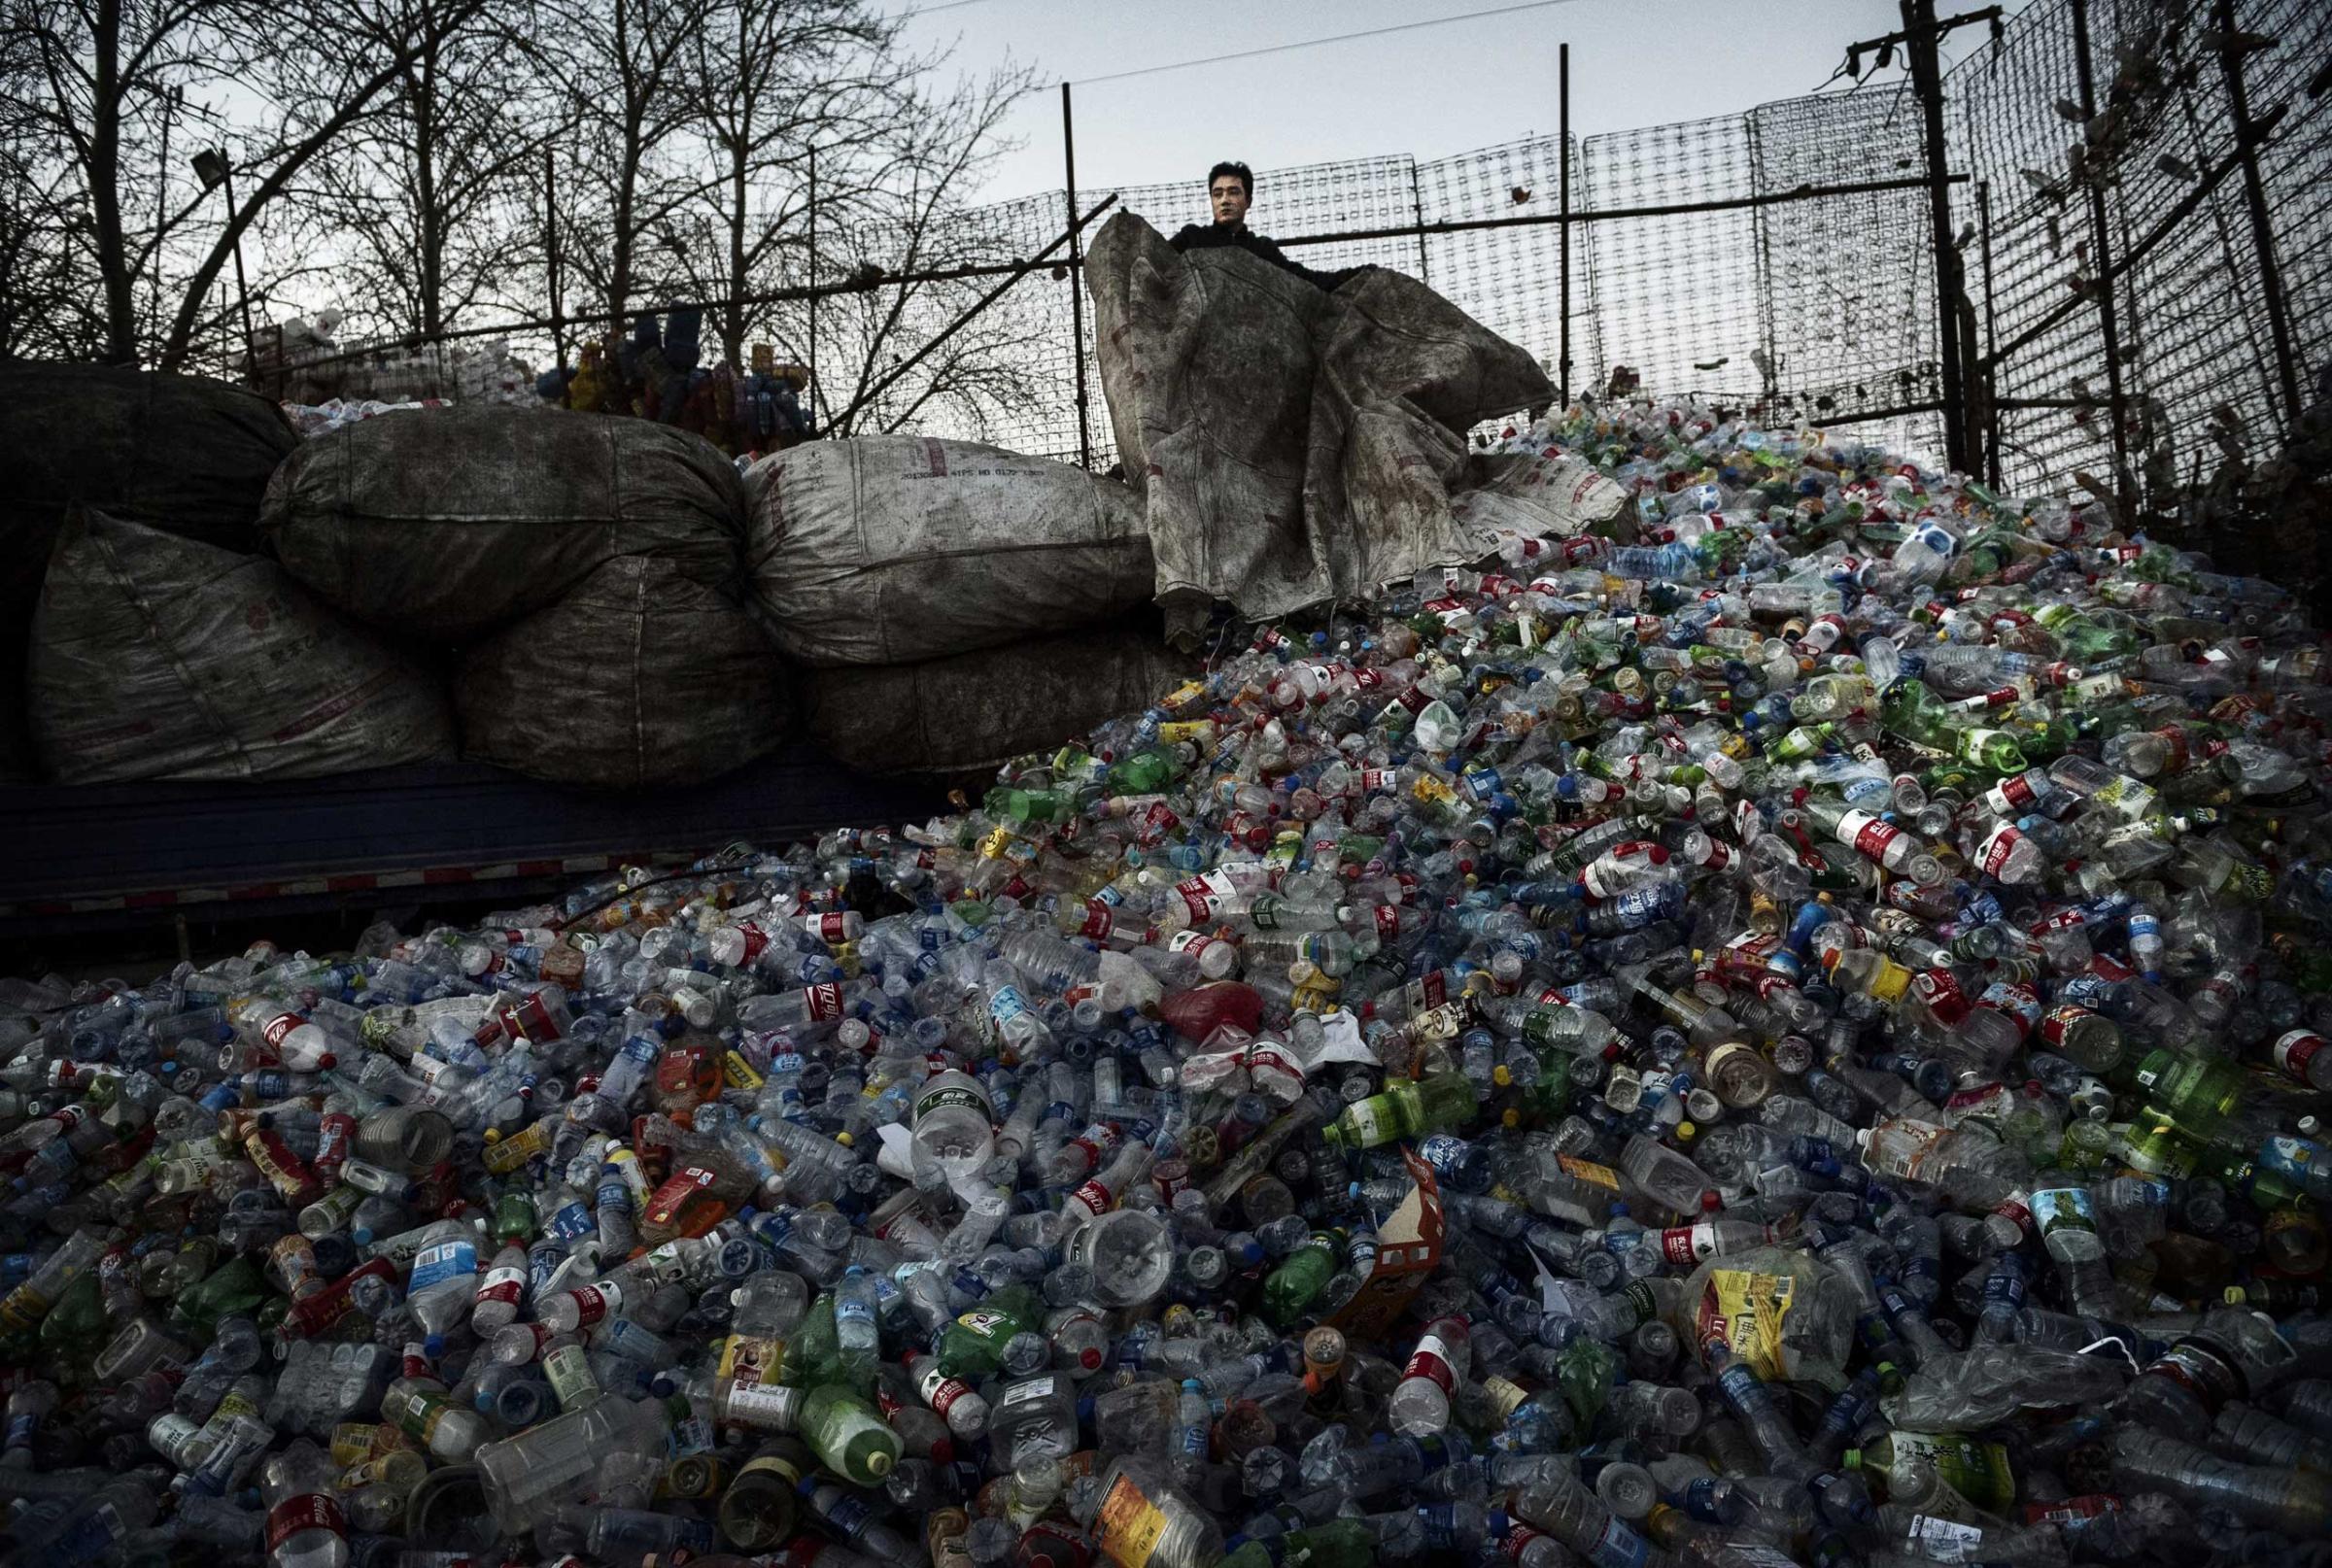 A laborer unloads plastic bottles to be recycled in the Dong Xiao Kou village on Dec. 12, 2014 in Beijing.